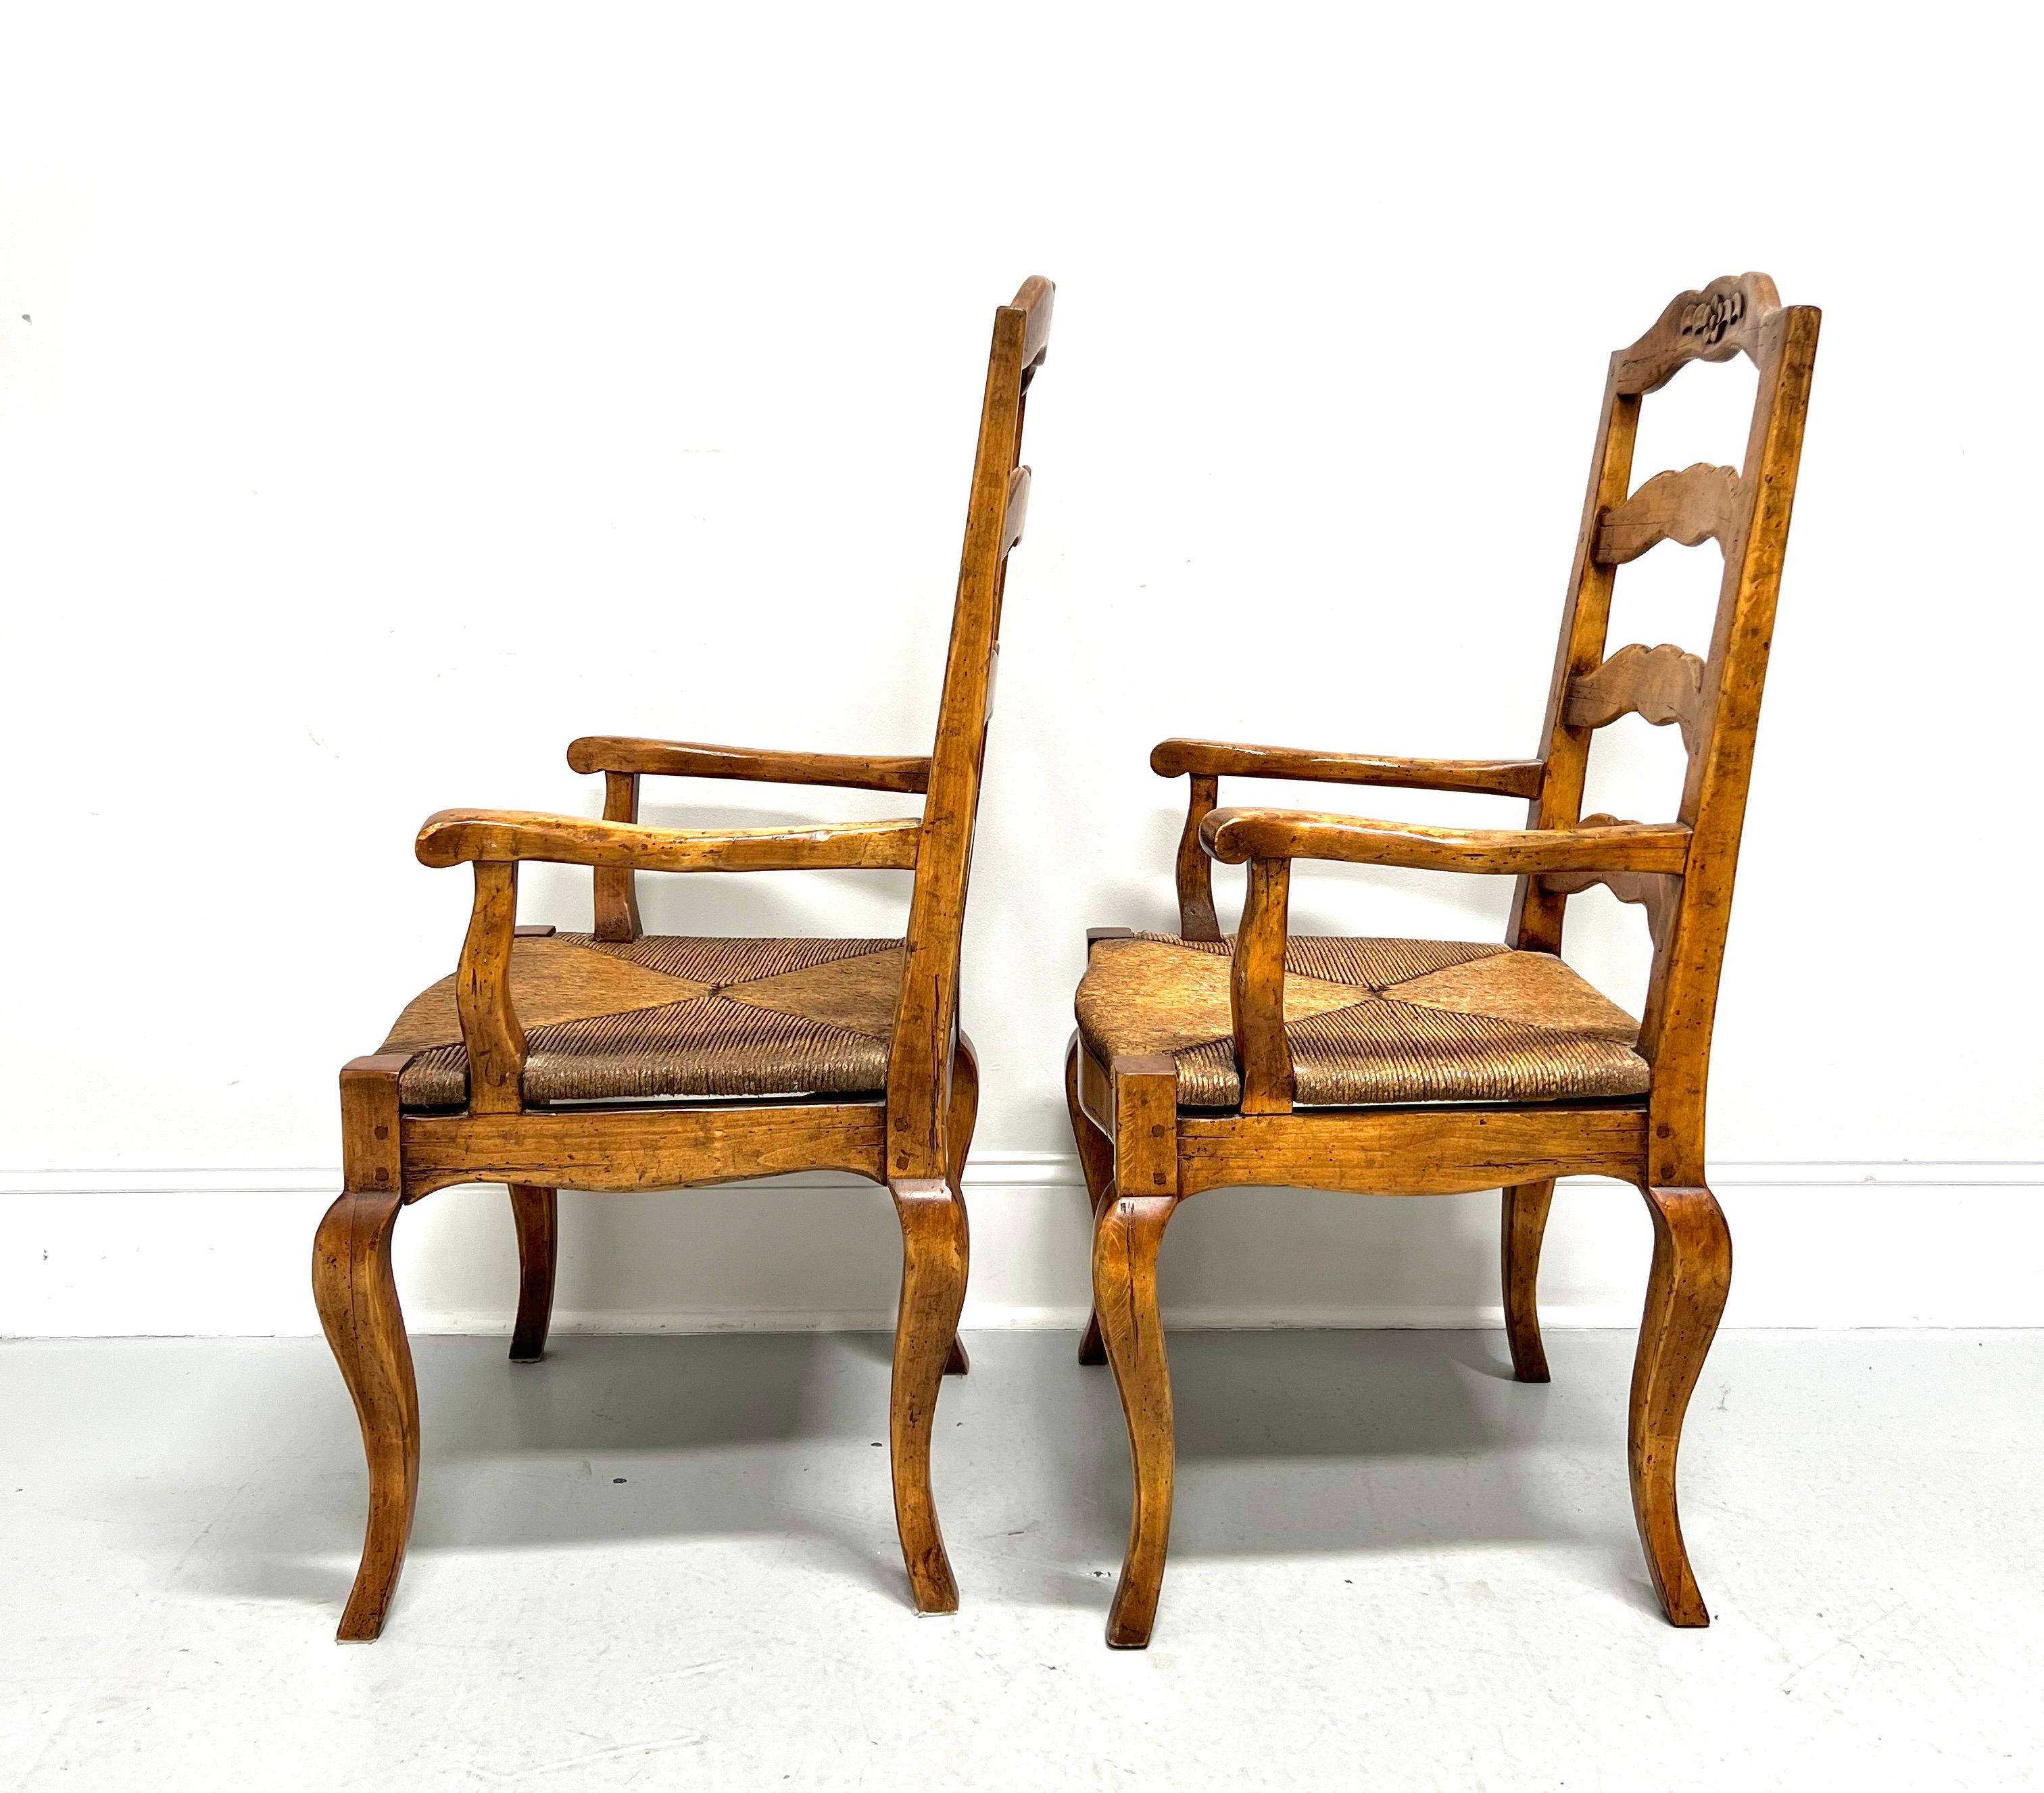 Late 20th C. Distressed French Country Dining Armchairs w/ Rush Seats - Pair In Good Condition For Sale In Charlotte, NC